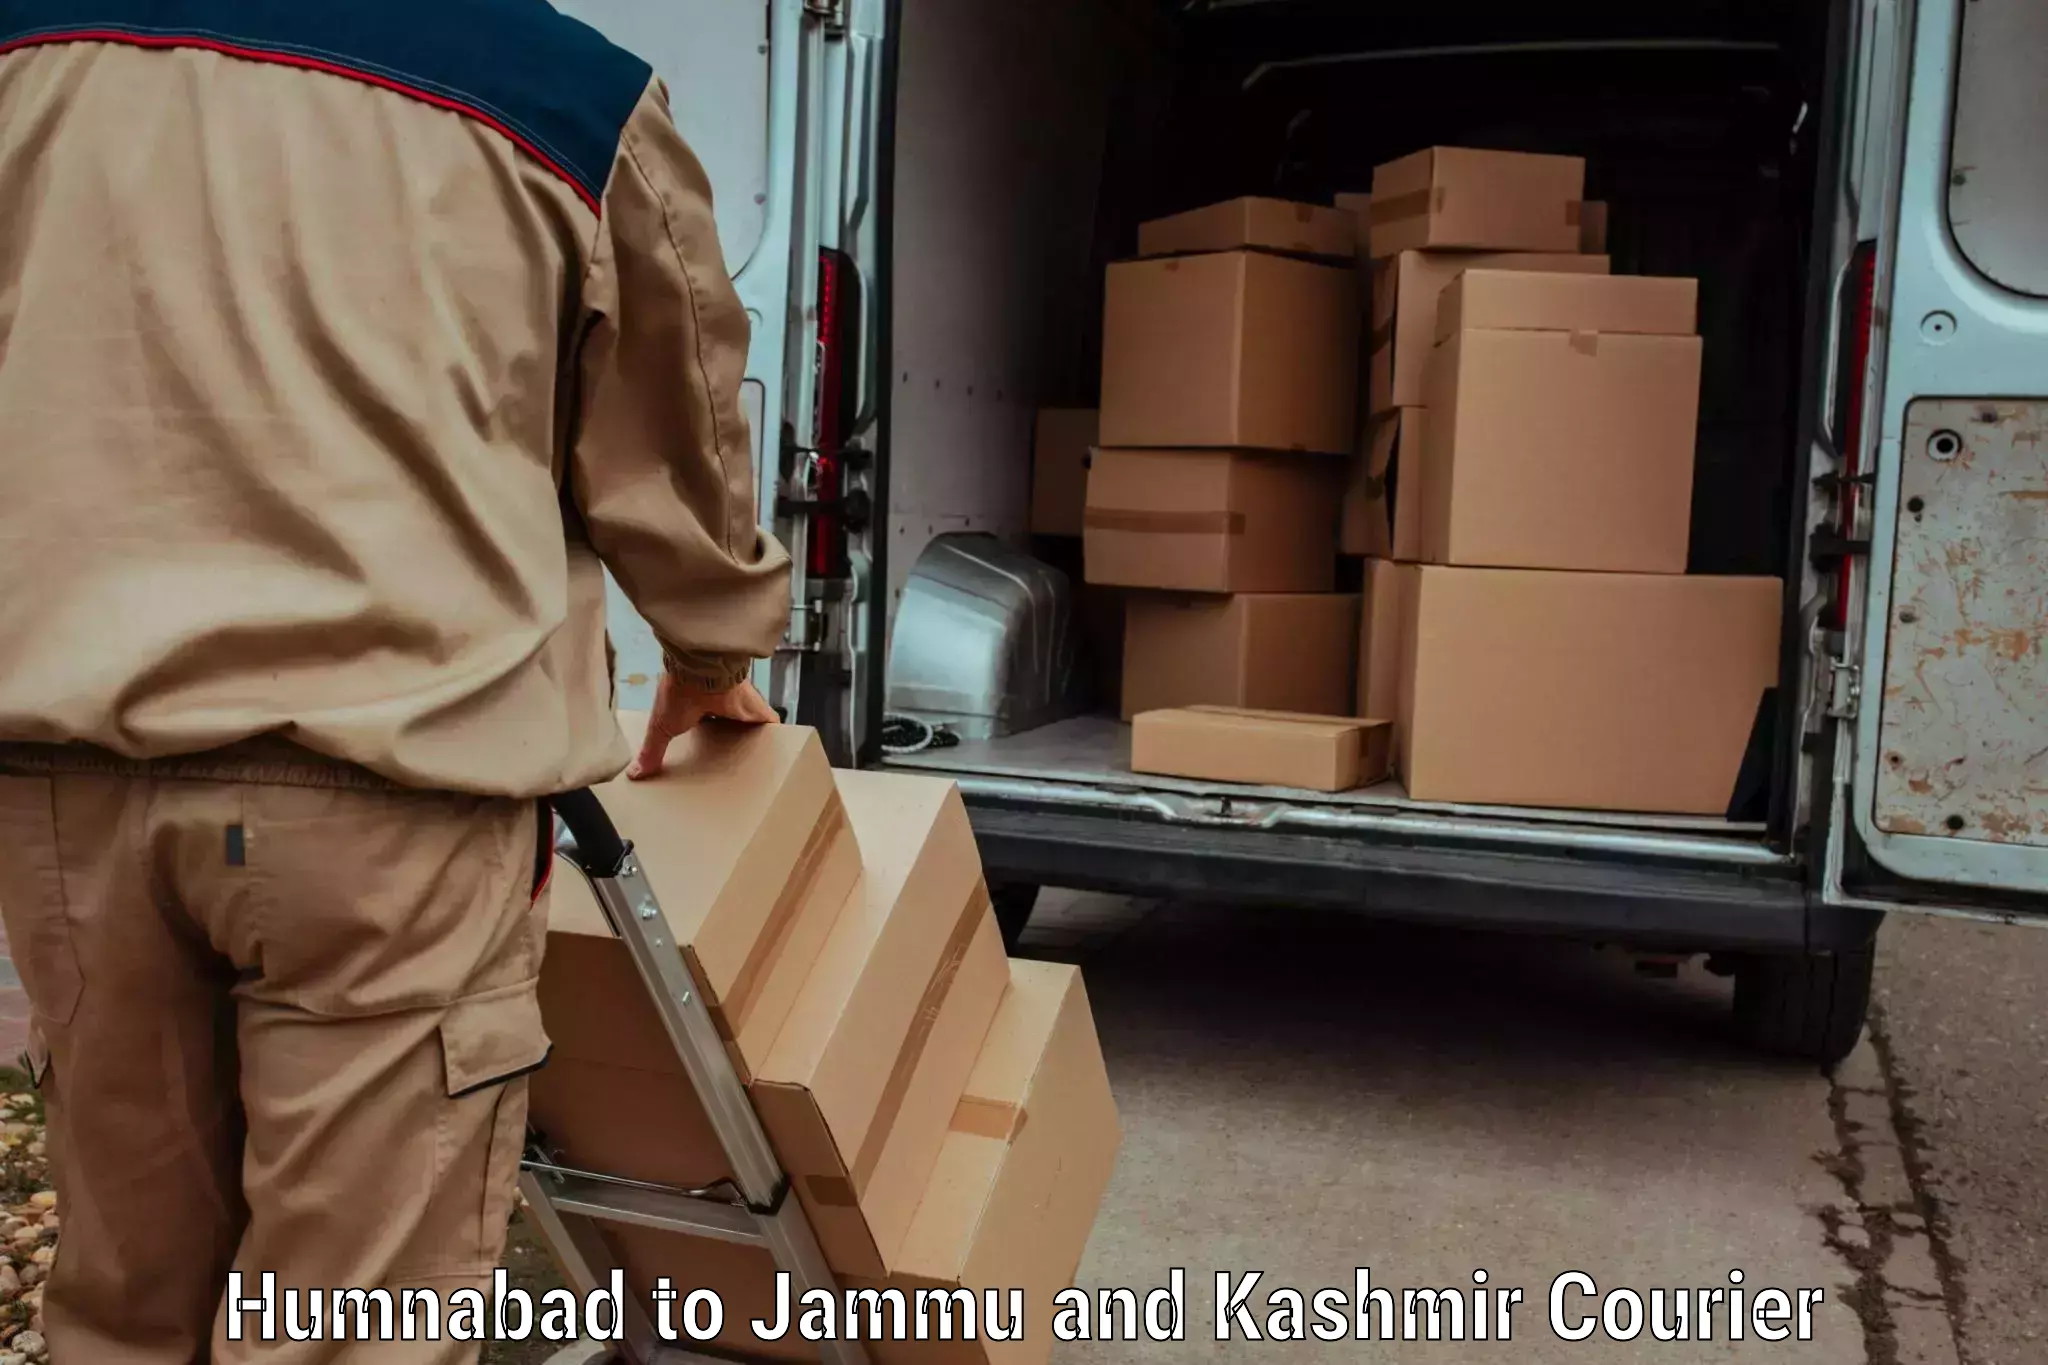 Sustainable shipping practices Humnabad to University of Jammu